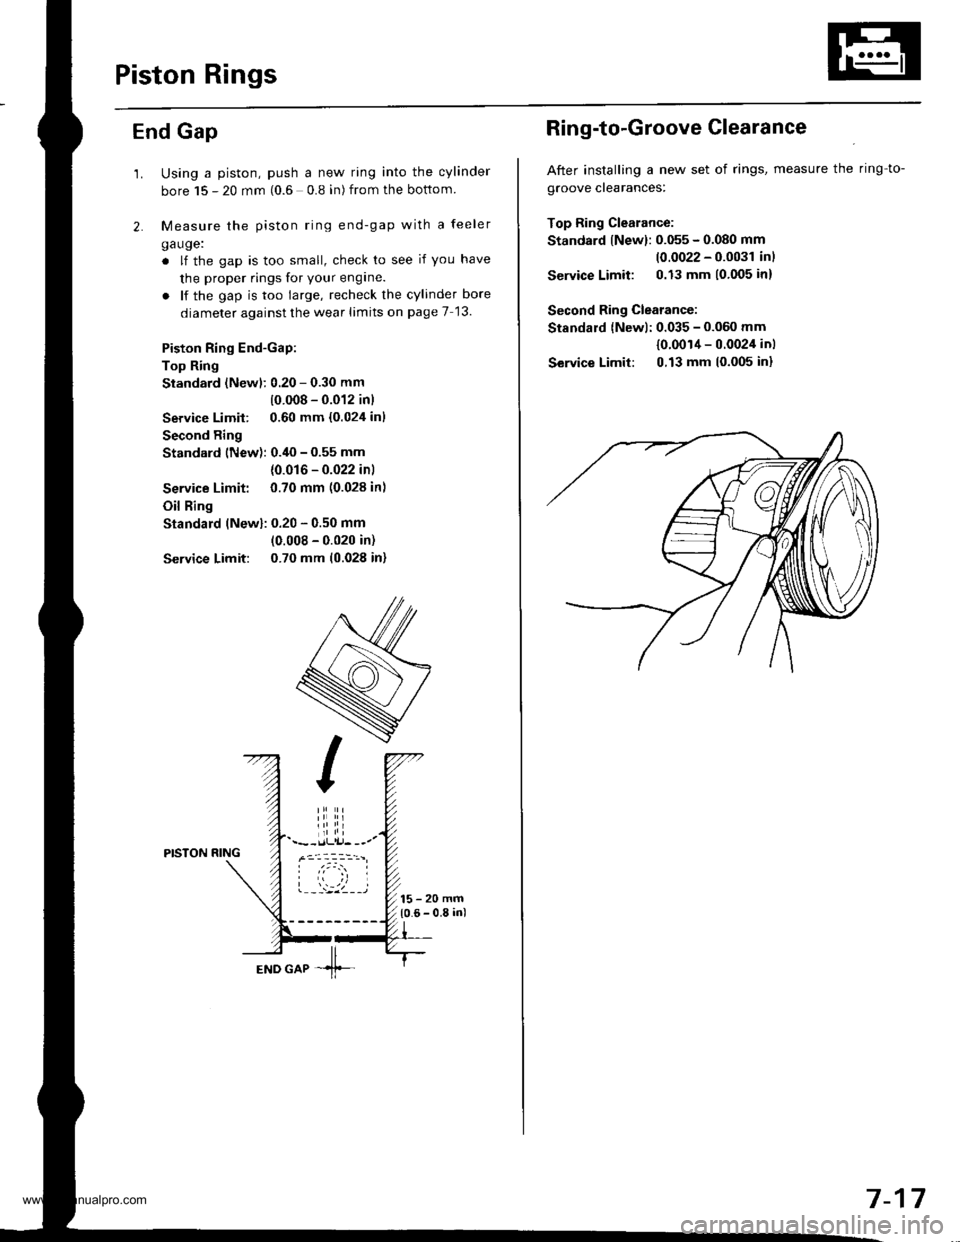 HONDA CR-V 1999 RD1-RD3 / 1.G Owners Manual 
Piston Rings
End Gap
2.
1.Using a piston, push a new ring into the cylinder
bore 15 - 20 mm (0.6 0.8 in) from the bottom
Measure the piston ring end-gap with a feeler
ga uge:
. lf the gap is too smal